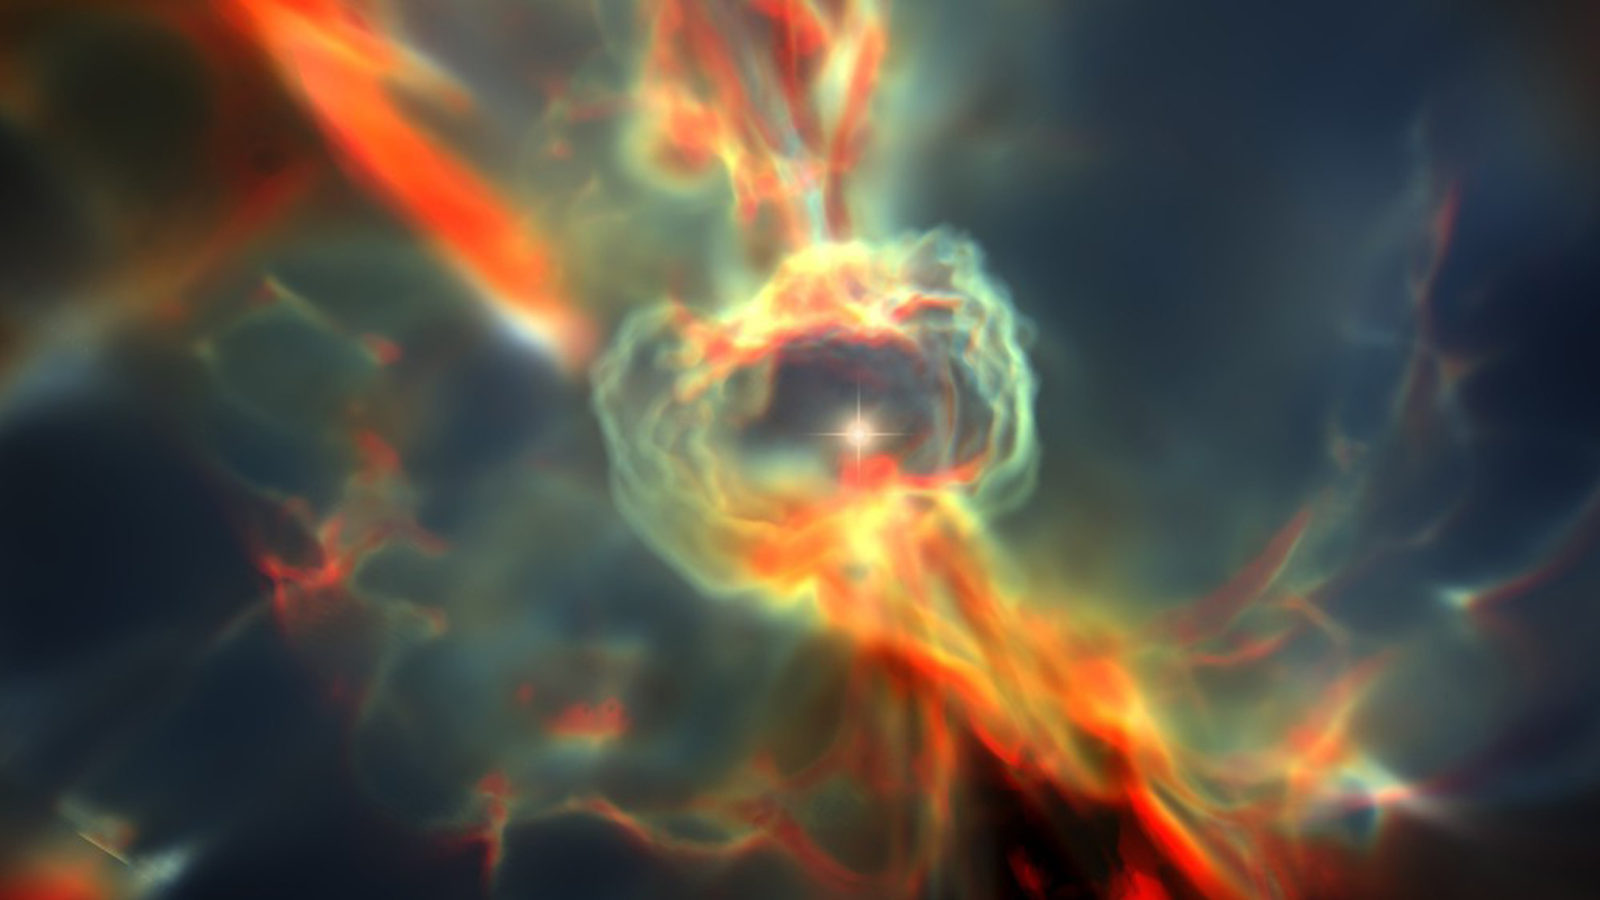 Image of a superbright star heats up, dispersing some of its surroundings before it is consumed in a supernova explosion